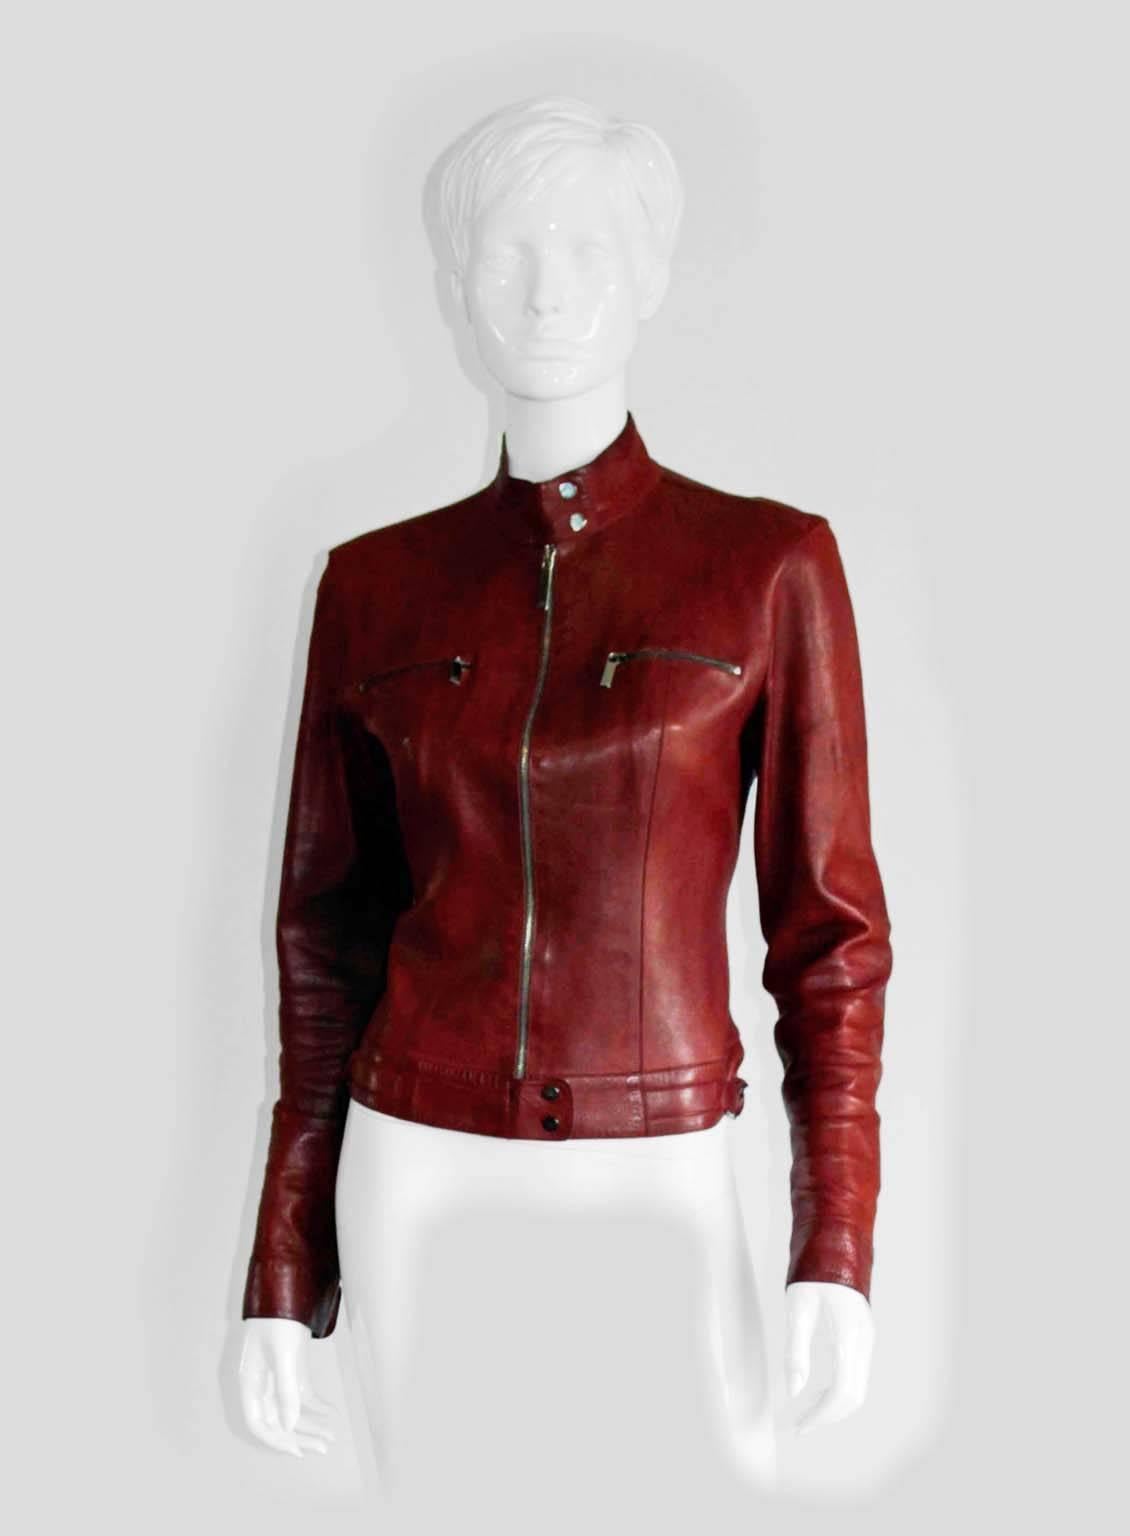 Gorgeous Tom Ford for Gucci Spring/Summer 1999 maroon leather moto jacket. The heavenly moto jacket is an Italian size 44, but these jackets fit small so it will fit a US size 4 to 6 beautifully... an absolute must for any Tom Ford lover or